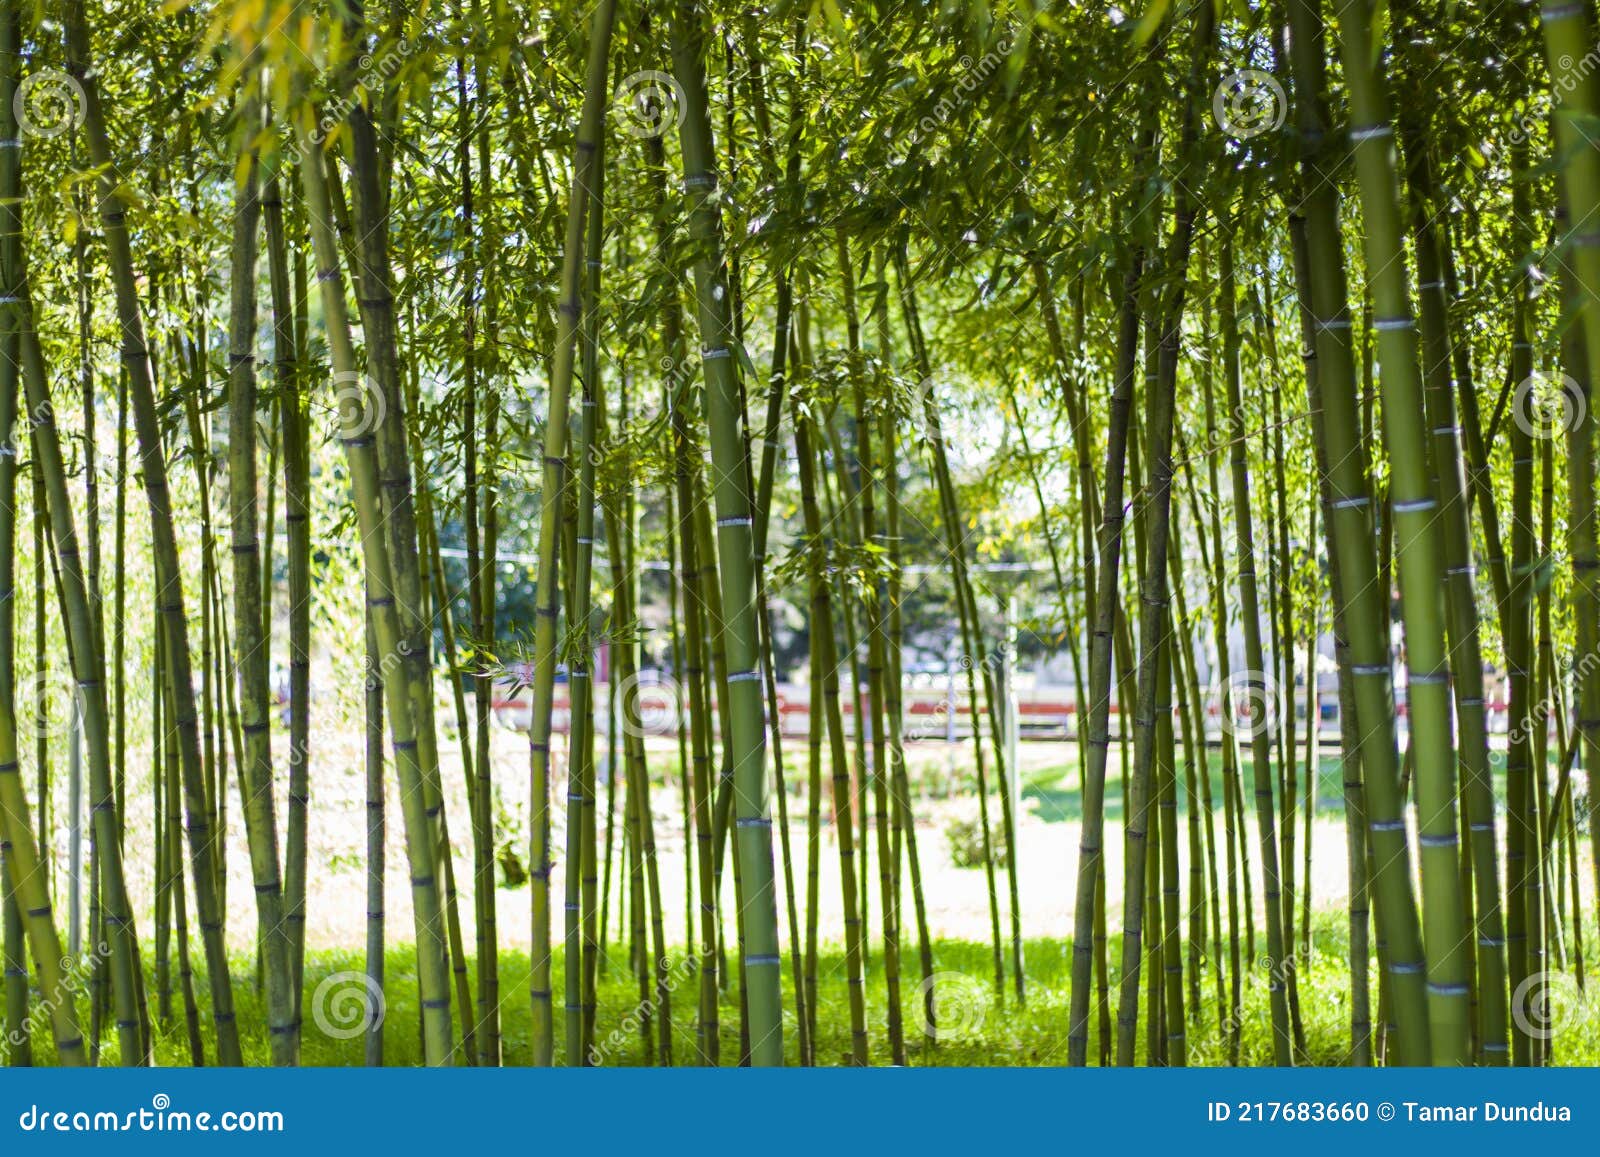 Wallpaper and Background of Nature, Bamboo Trees in Garden Stock Photo -  Image of beauty, detail: 217683660